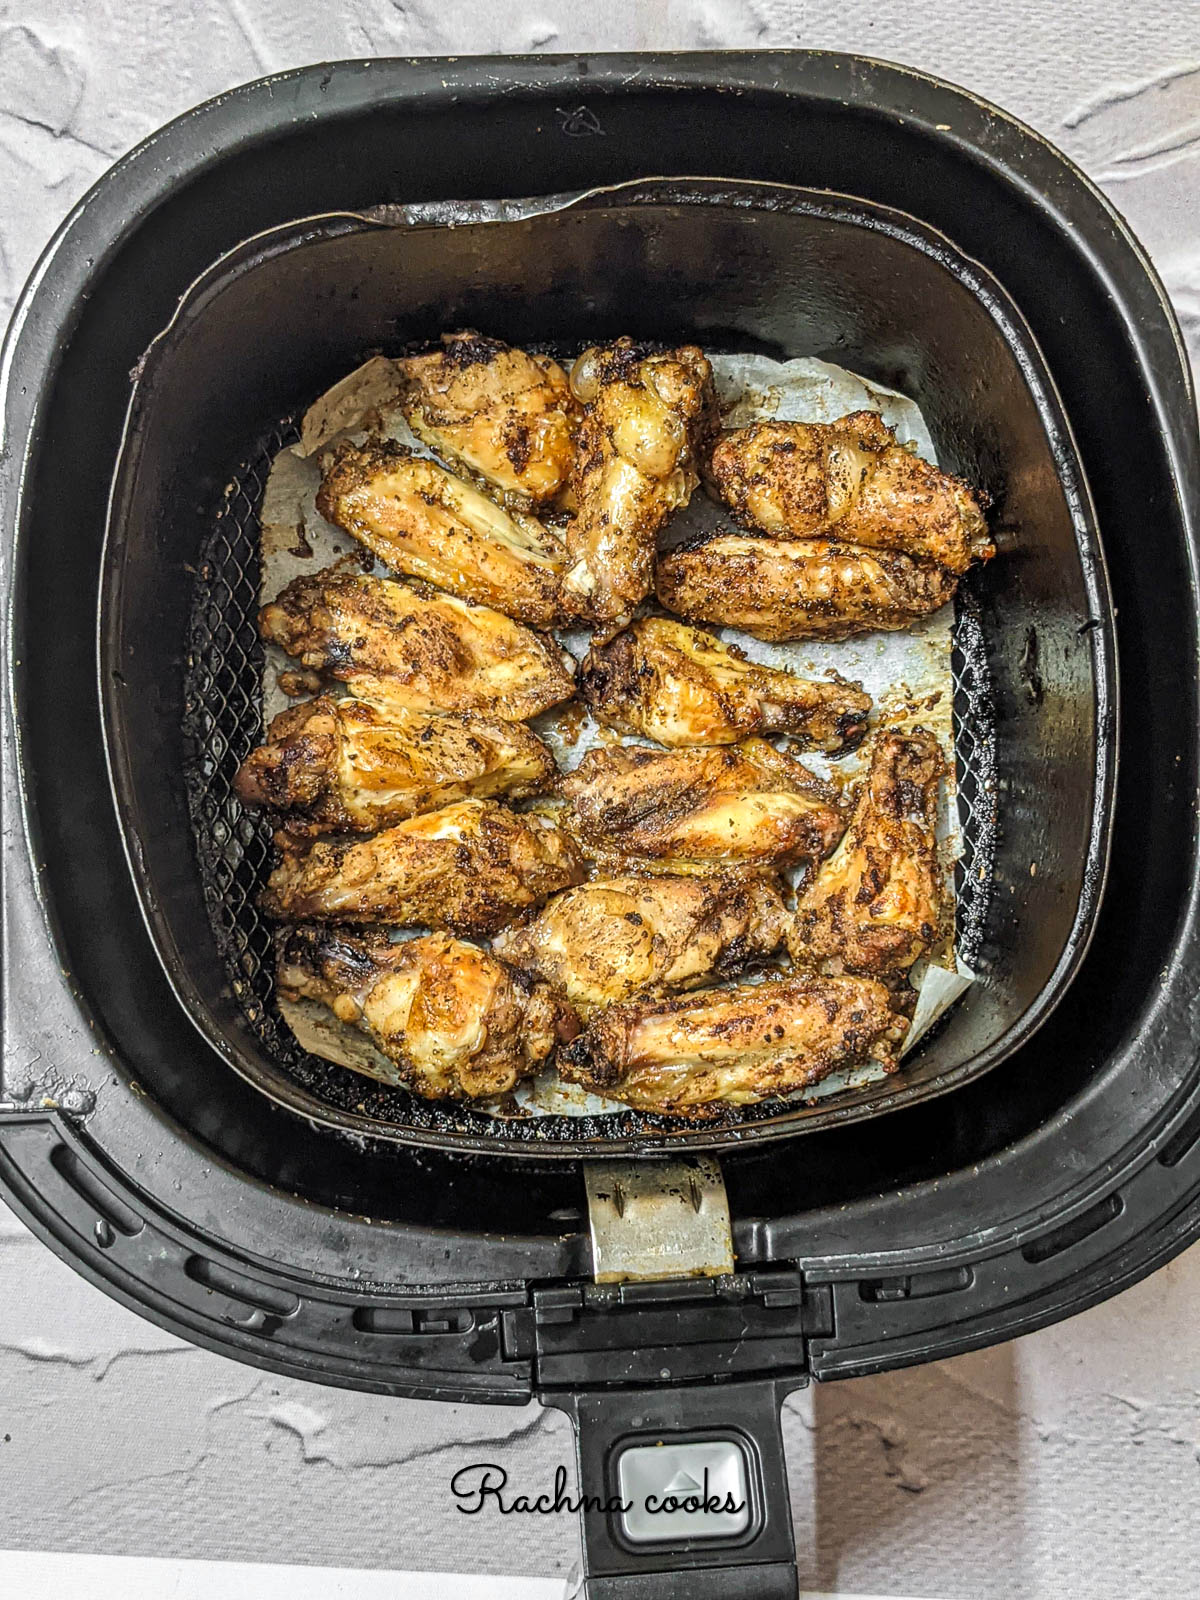 wings after air frying in air fryer basket lined with parchment paper